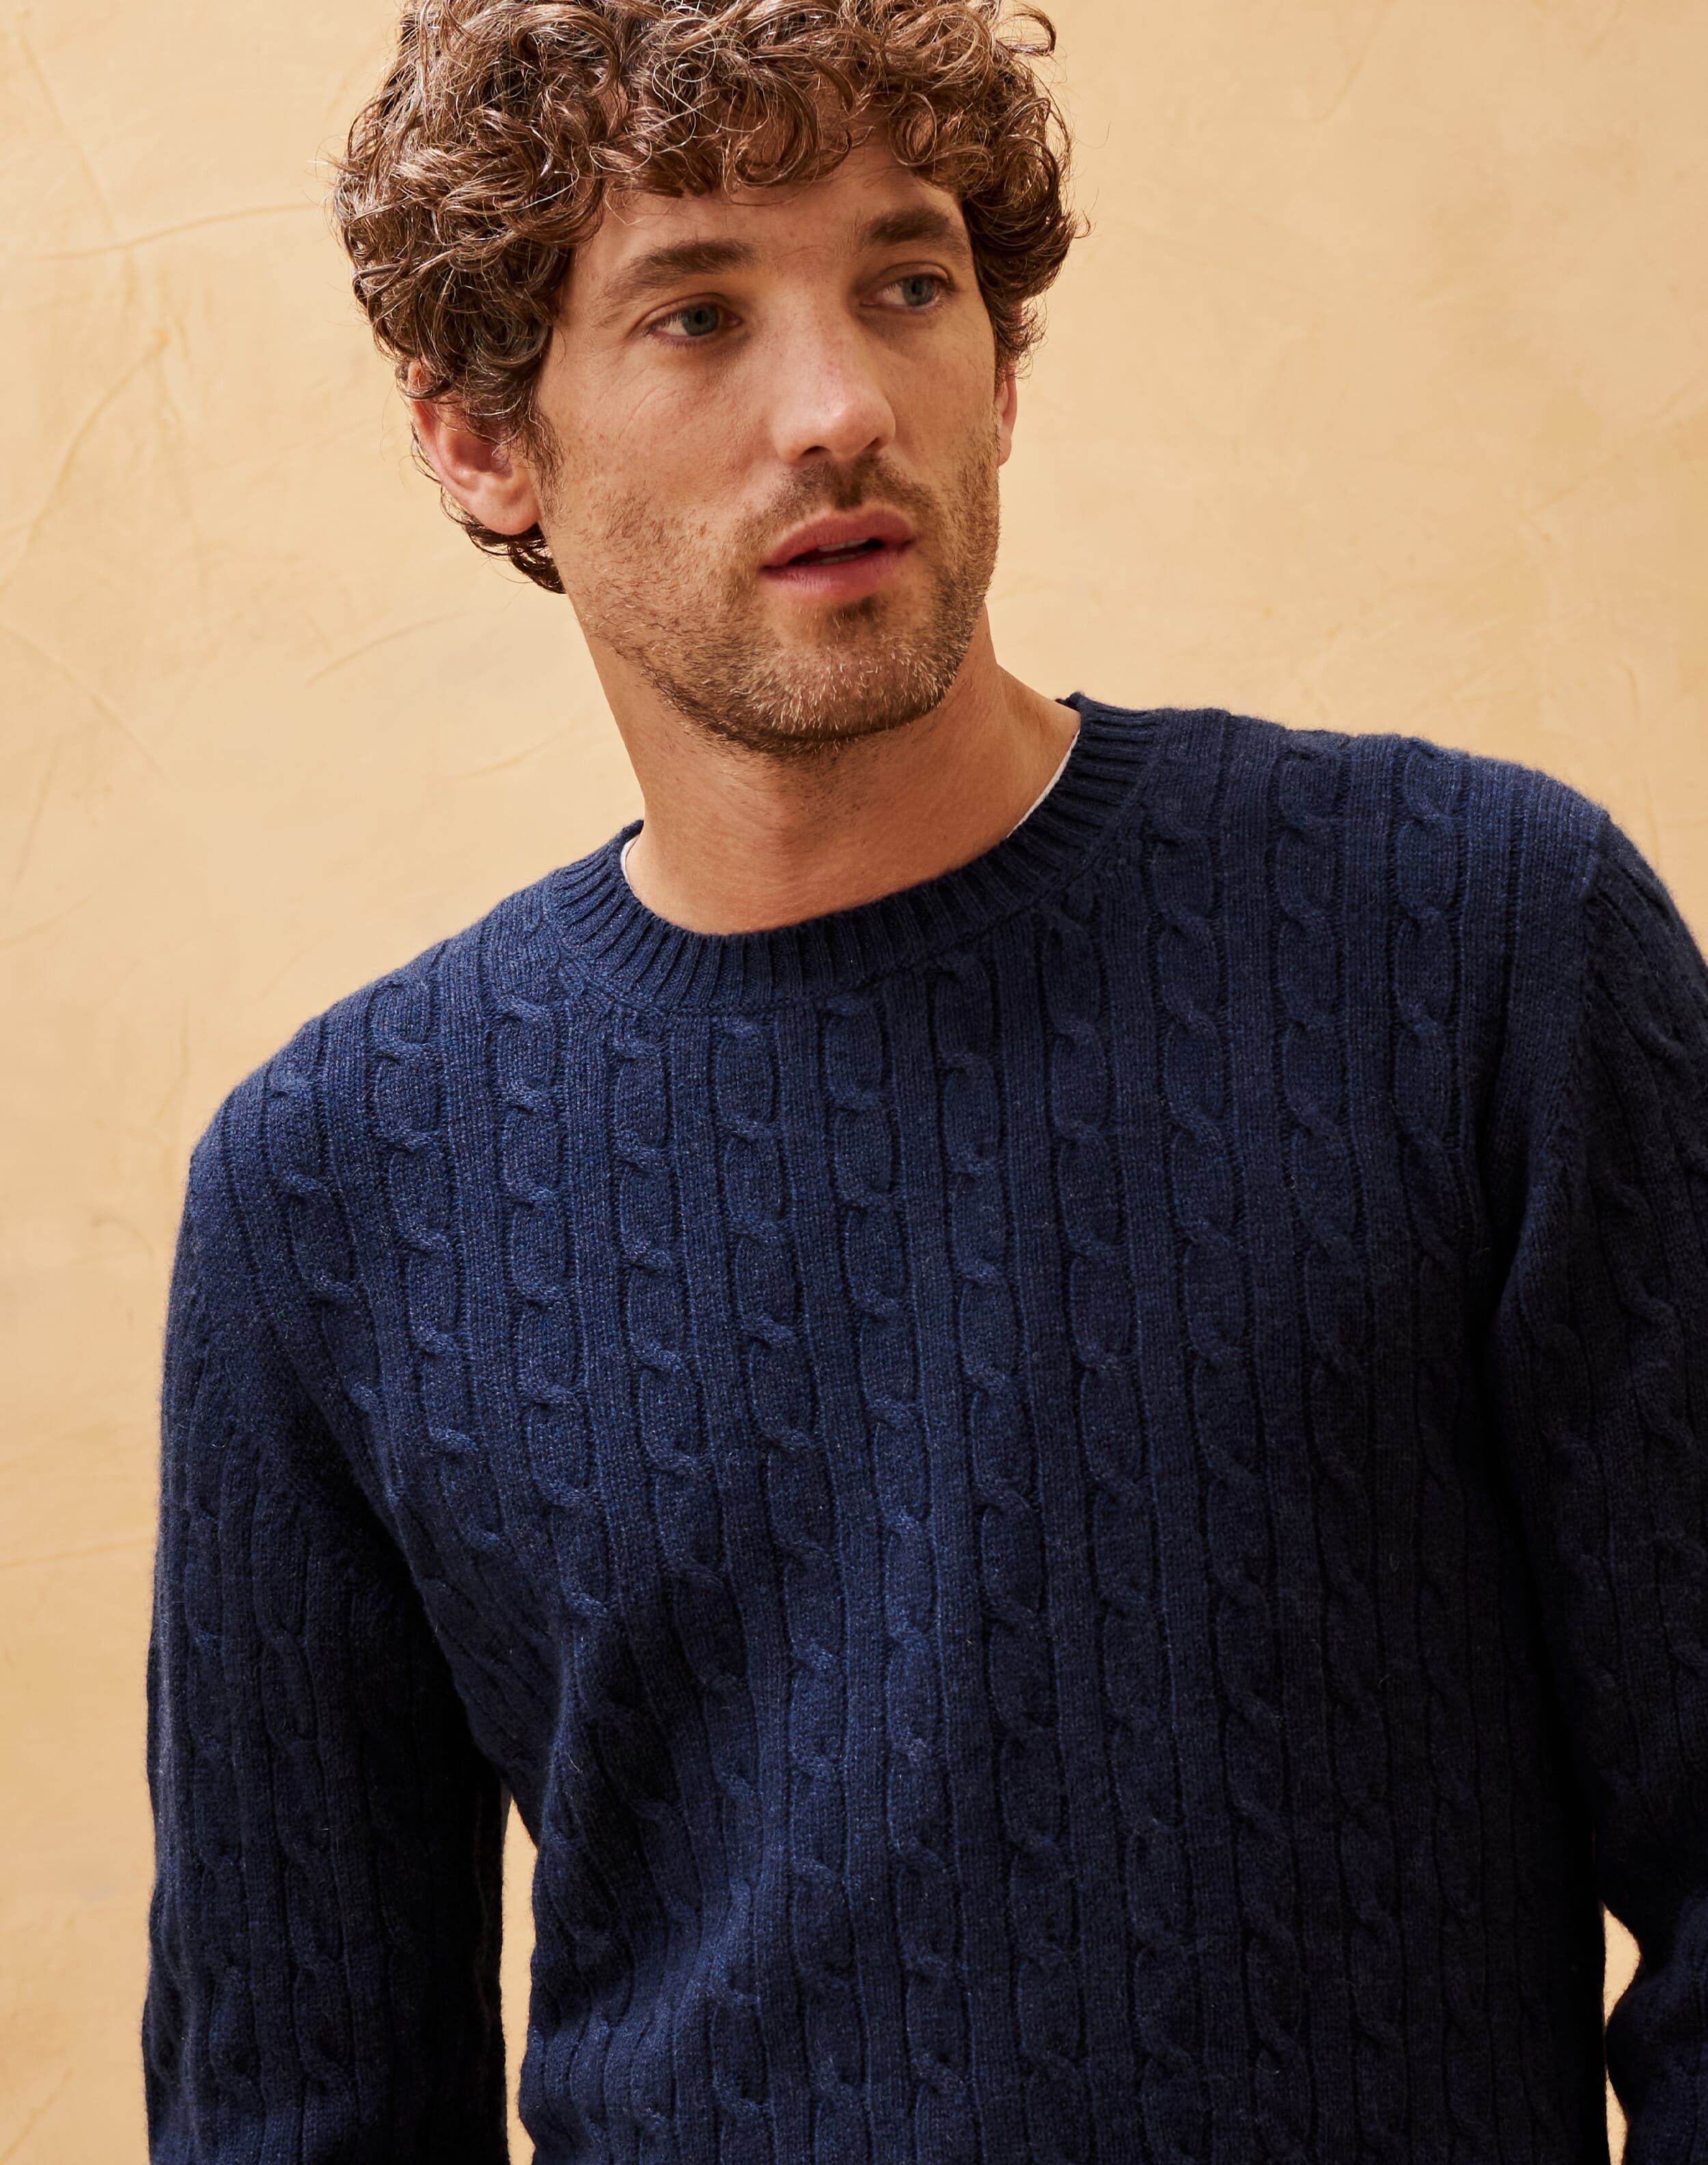 French Navy Cashmere Cable Knit Jumper | Men's Jumpers | Brora